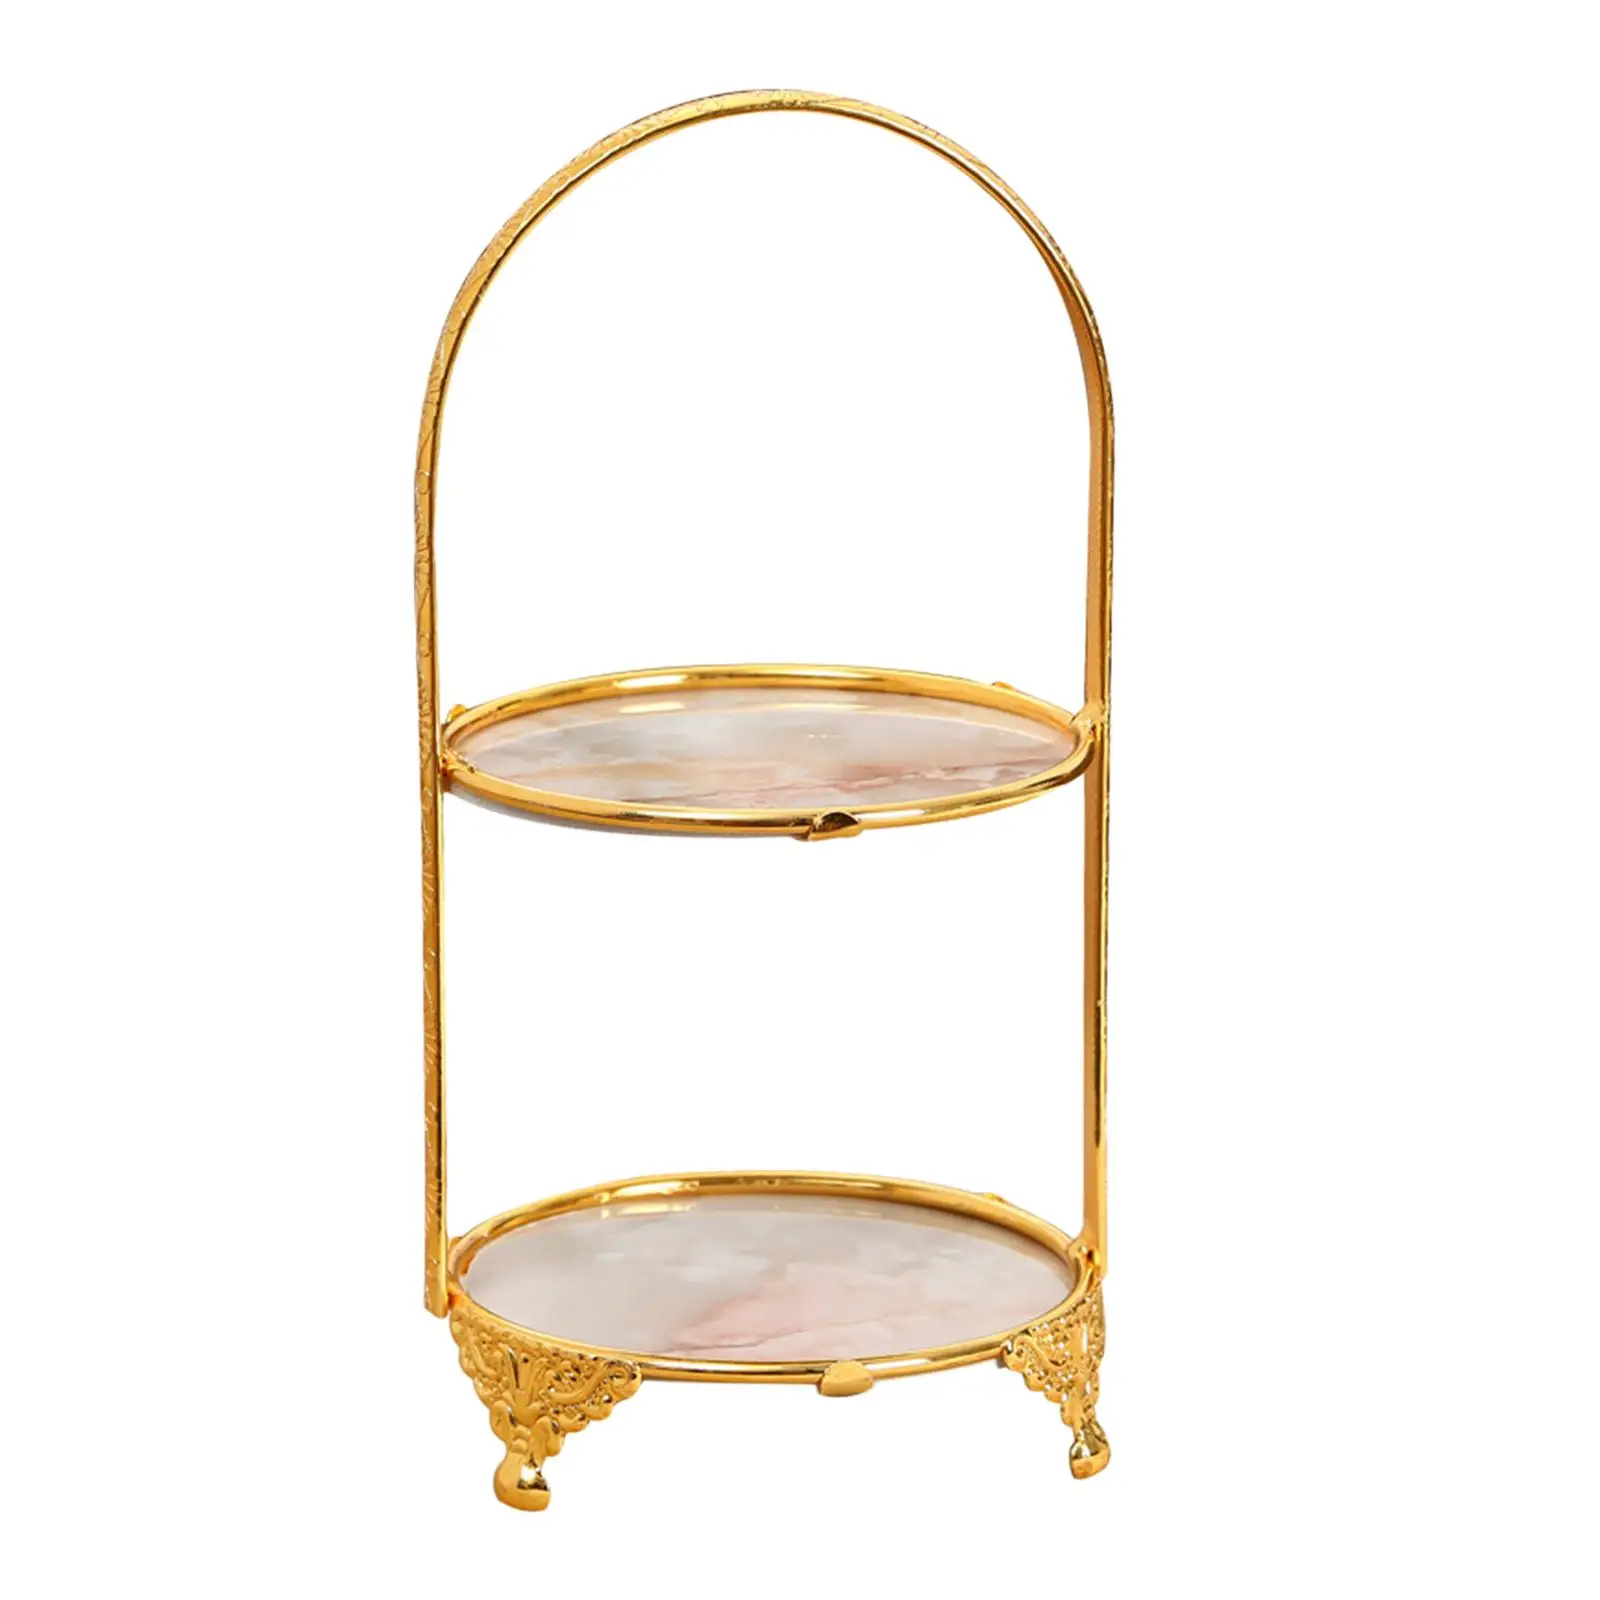 Iron Cake Stand Decor Serving Tray Antique Display Stand Cupcake Holder for Banquet Afternoon Tea Pastry Cookies Candy